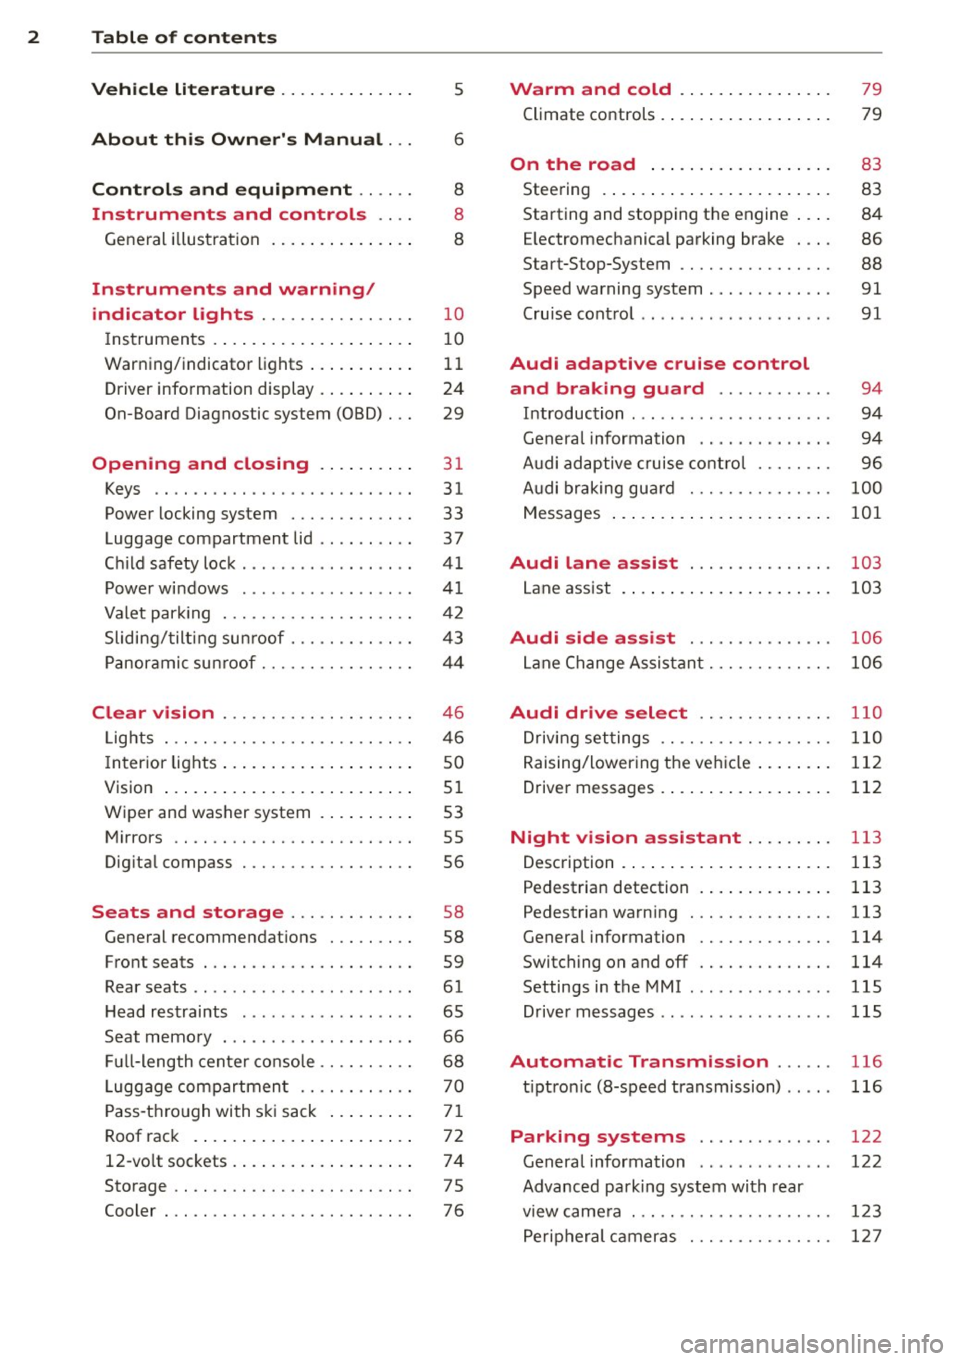 AUDI S8 2014  Owners Manual 2  Table  of  contents Vehicle  literature  .. .. .. .. .. ... . 
5 
About  this  Owners  Manual . . . 6 
Controls  and equipment  .. ...  . 
Ins truments  and  controls  .. . . 
General  illustratio